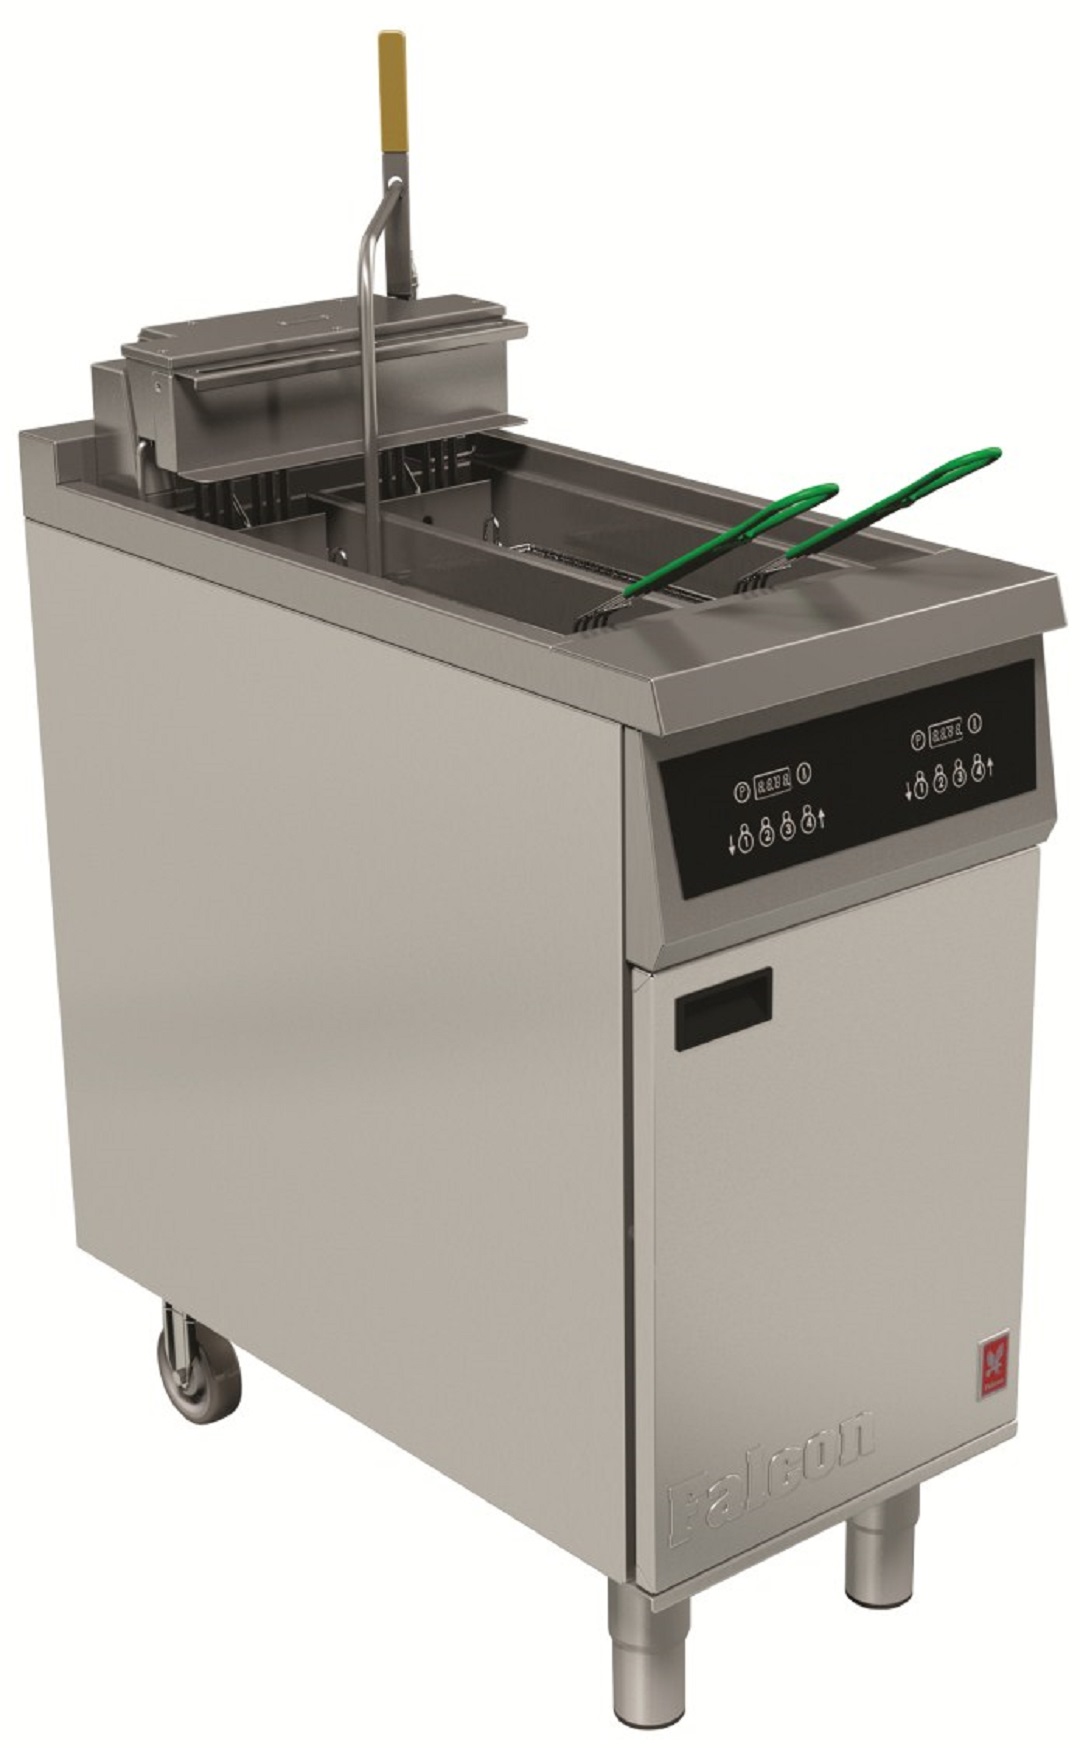 Falcon 400 Series E422F Fryer with in-built filtration